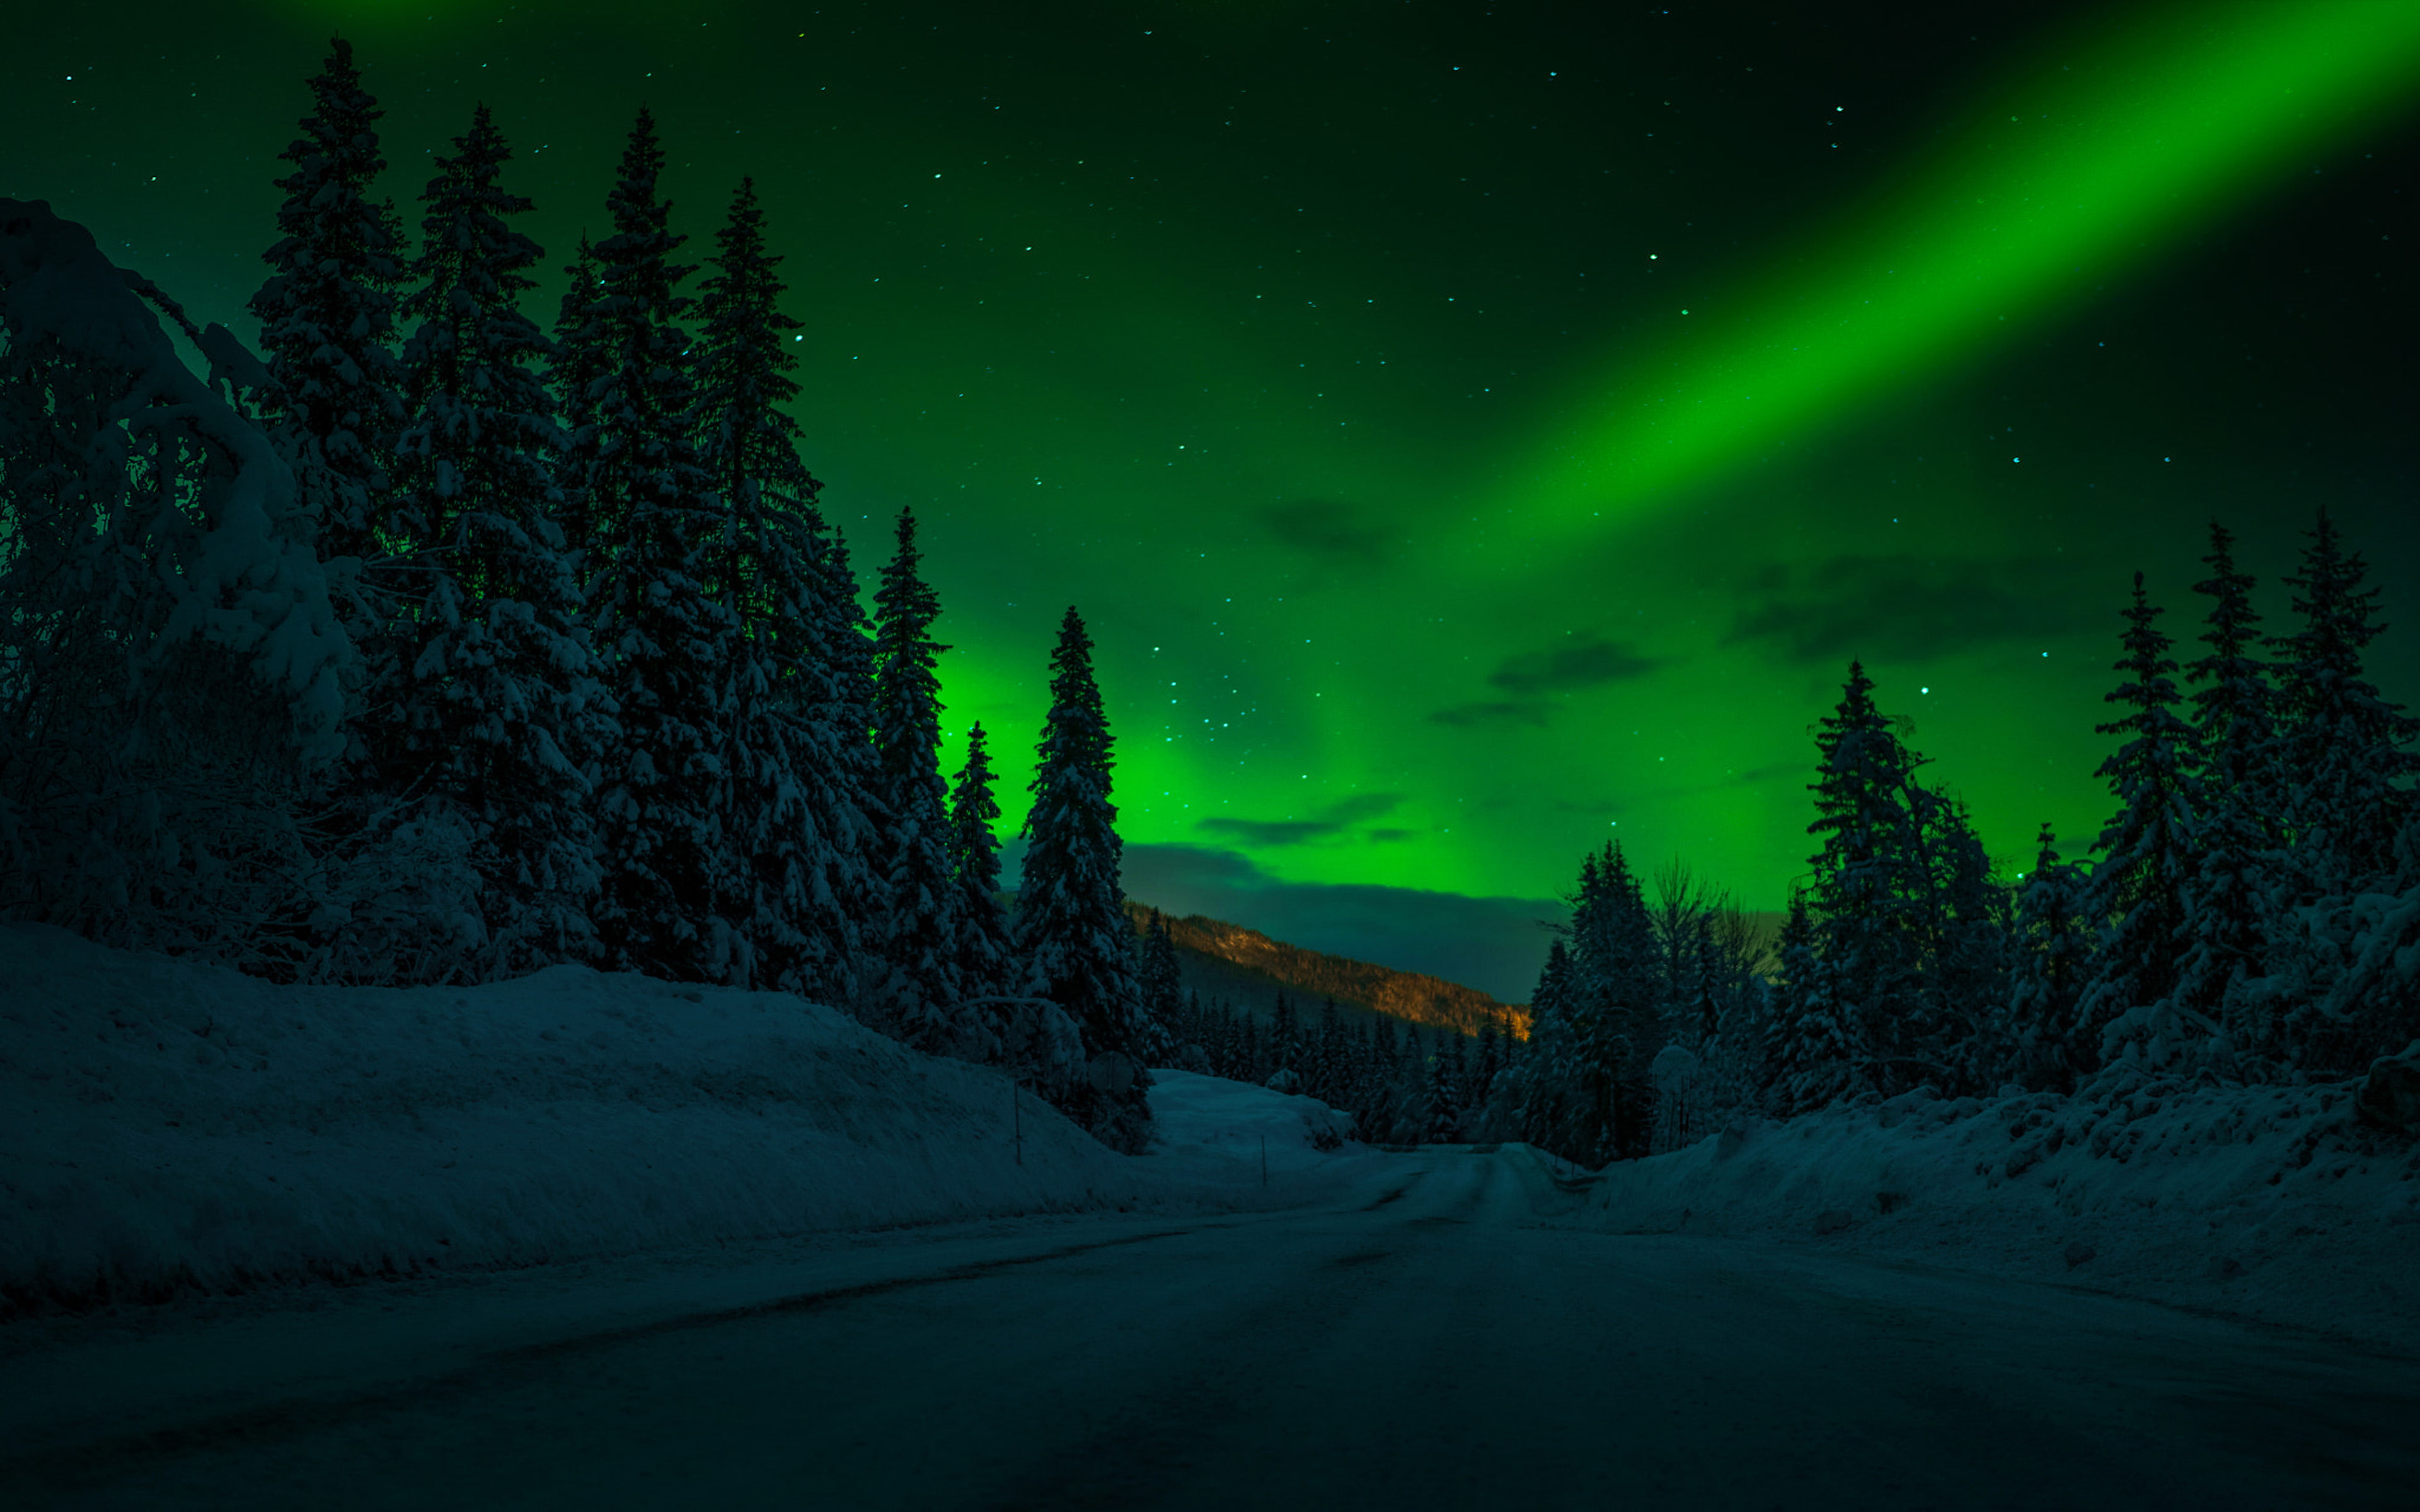 Norway Night Winter Snow Road Trees Trees Stars Stars Sky Polar Lights Night Landscape Photography Desktop Wallpaper Hd For Mobile Phones And Laptops